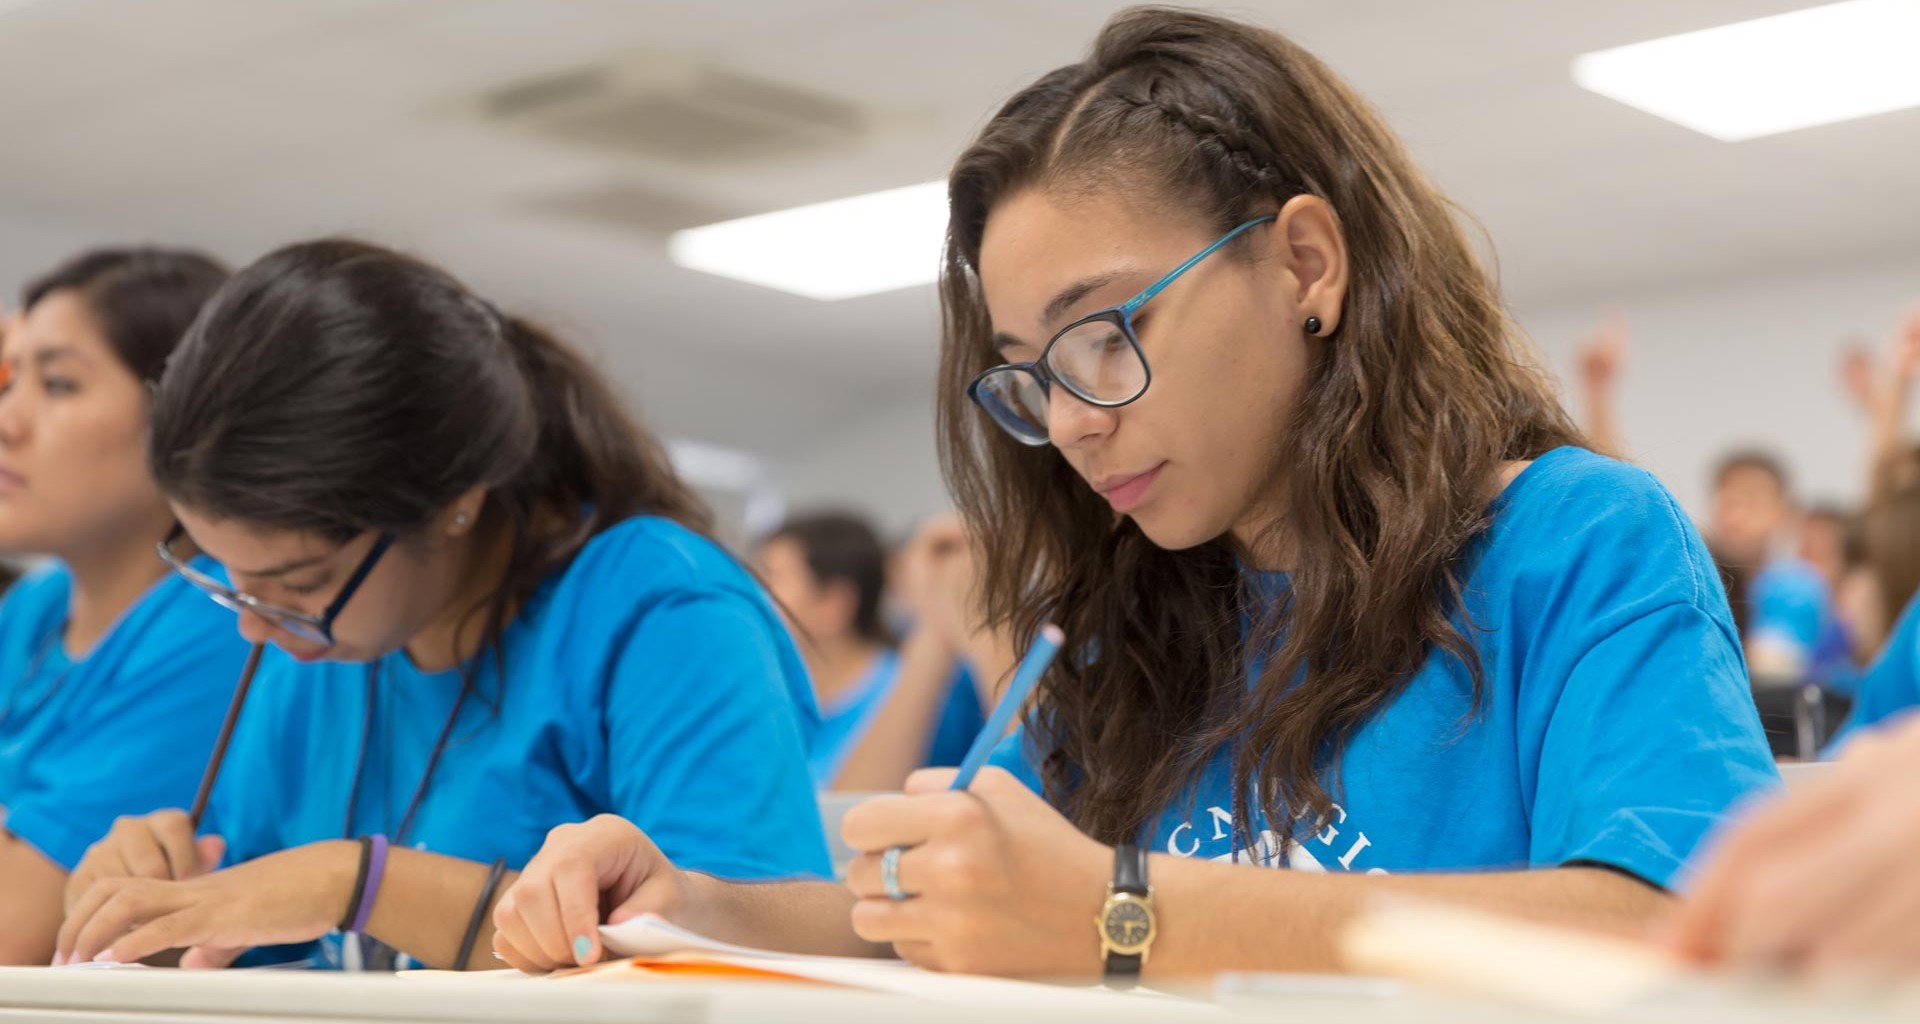 These are the 7 kinds of scholarships offered by Tec de Monterrey